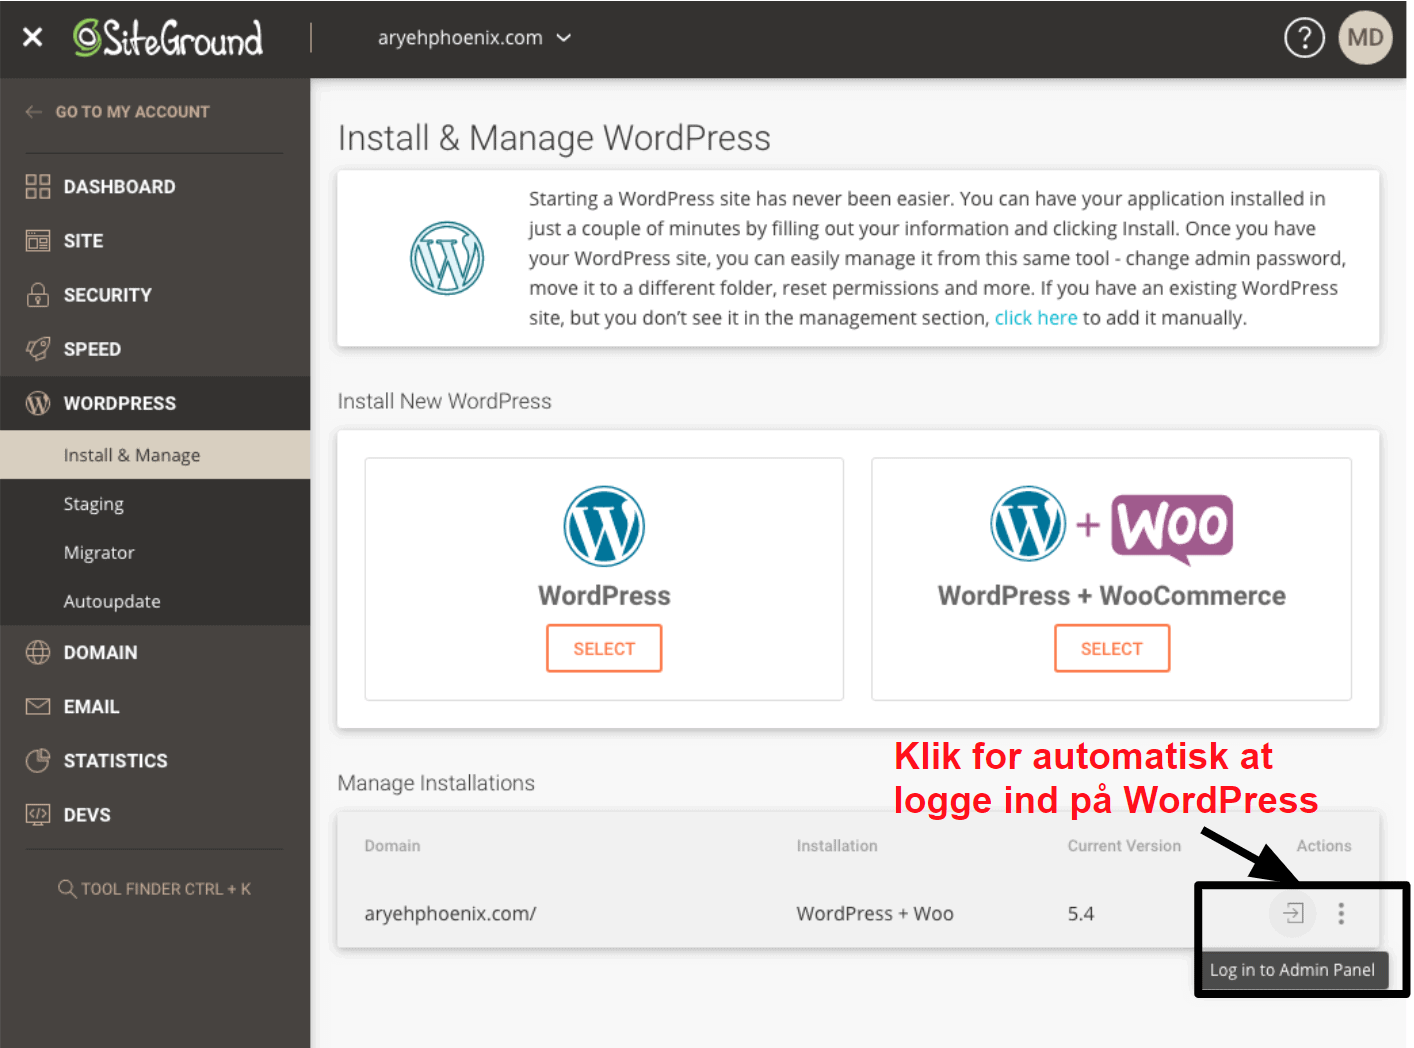 SiteGround offers a one click login option for your WordPress dashboard DA15